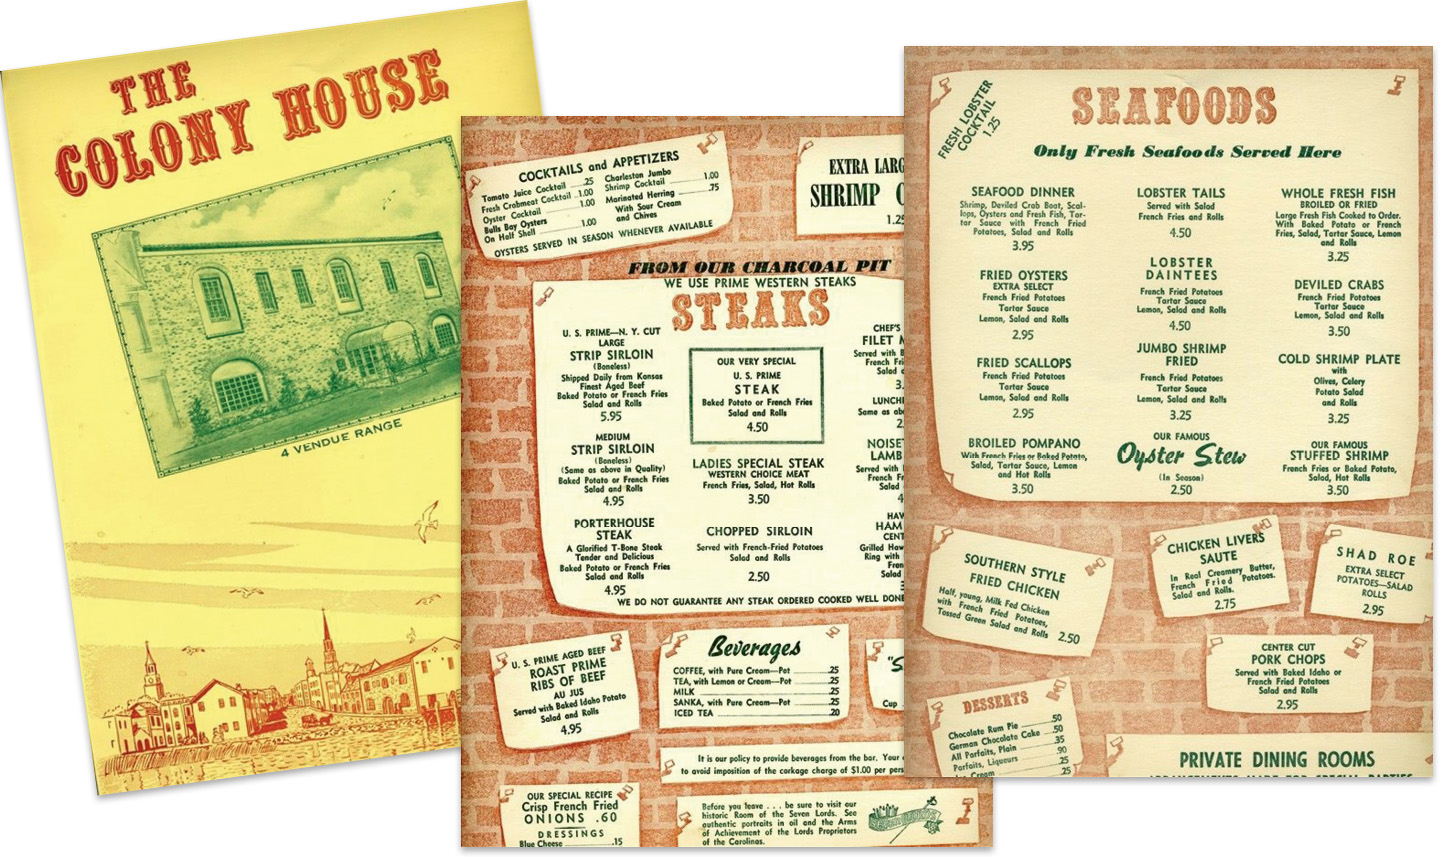 Menus from the old school restaurant circa 1960s, before new owners Franz Meier, Chris Weihs, and Harry Waddington “would turn haute cuisine in Charleston on its head.”